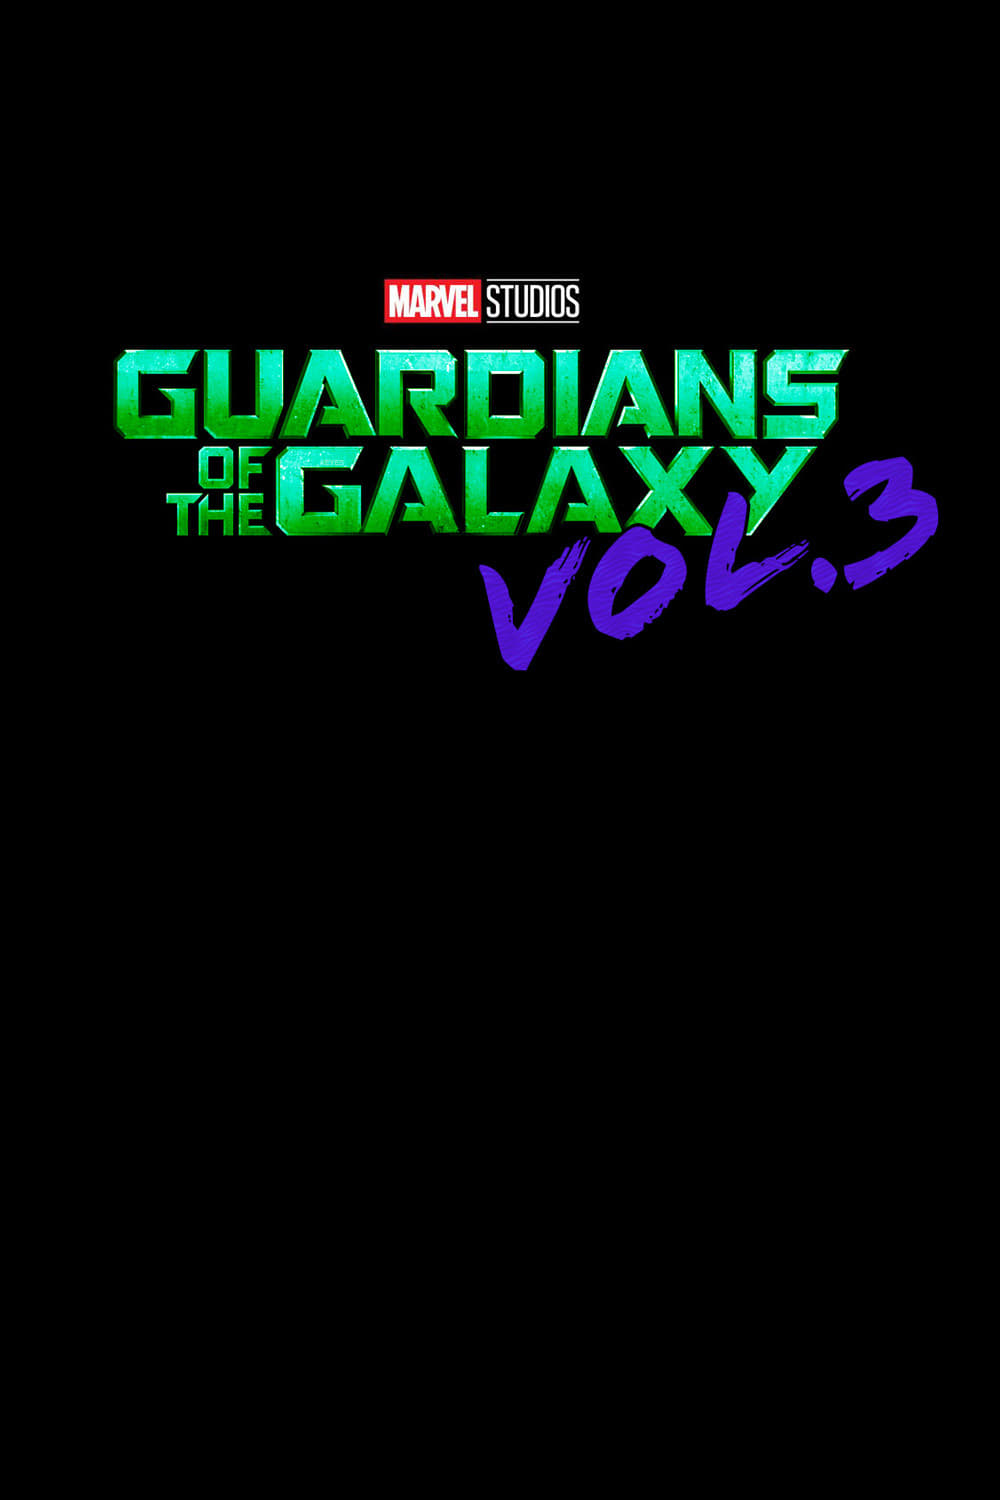 Poster for the movie "Guardians of the Galaxy Vol. 3"